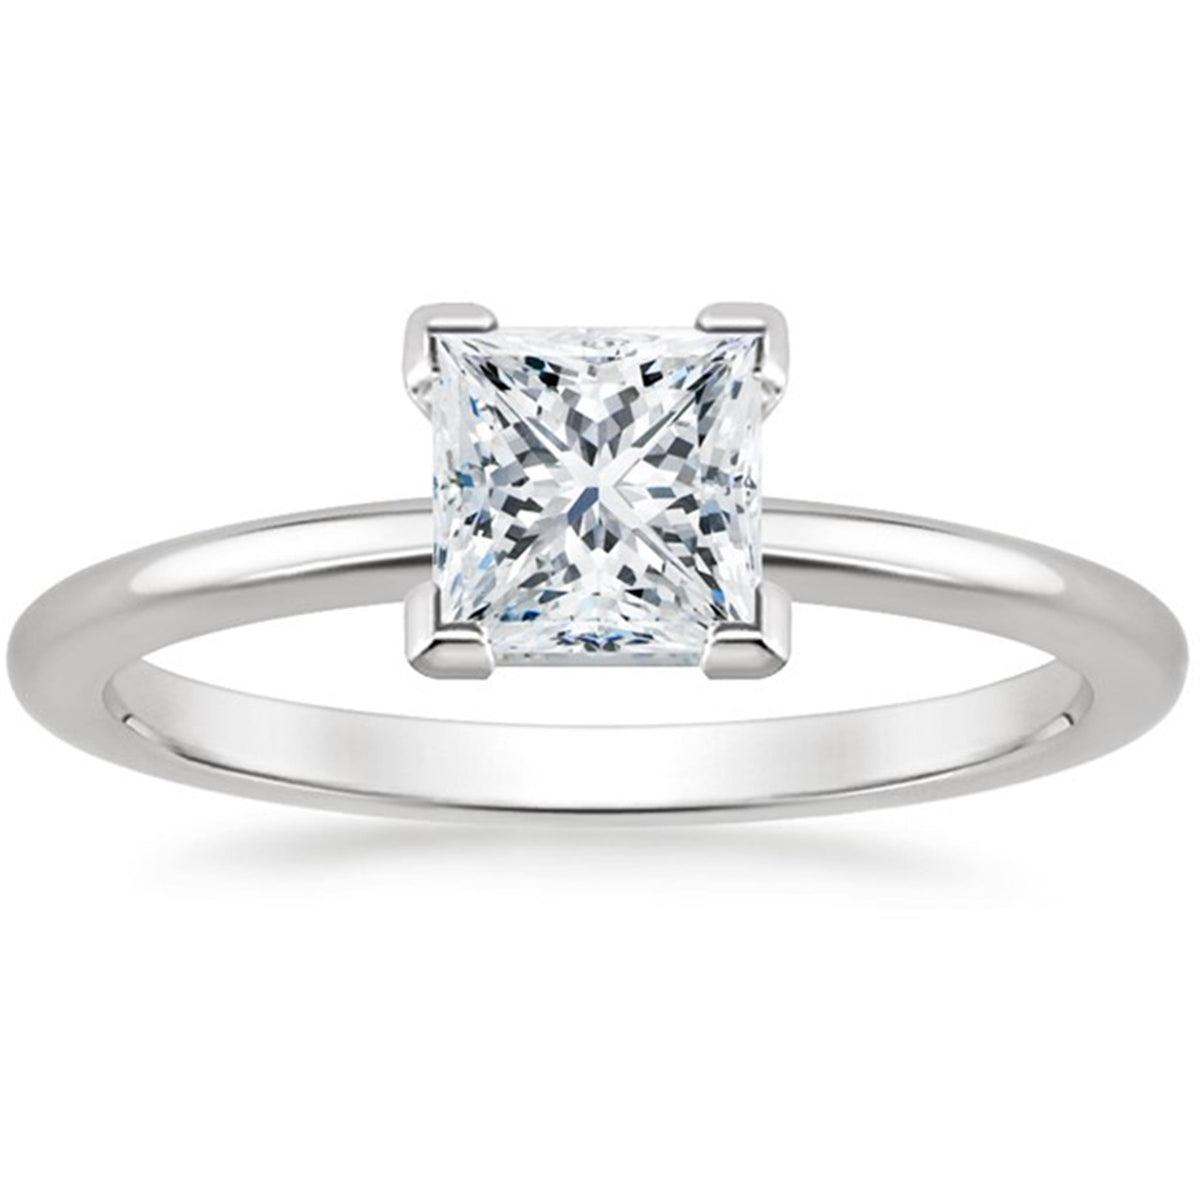 14Kt White Gold Solitaire Ring With 0.27ct Princess Natural Center Diamond